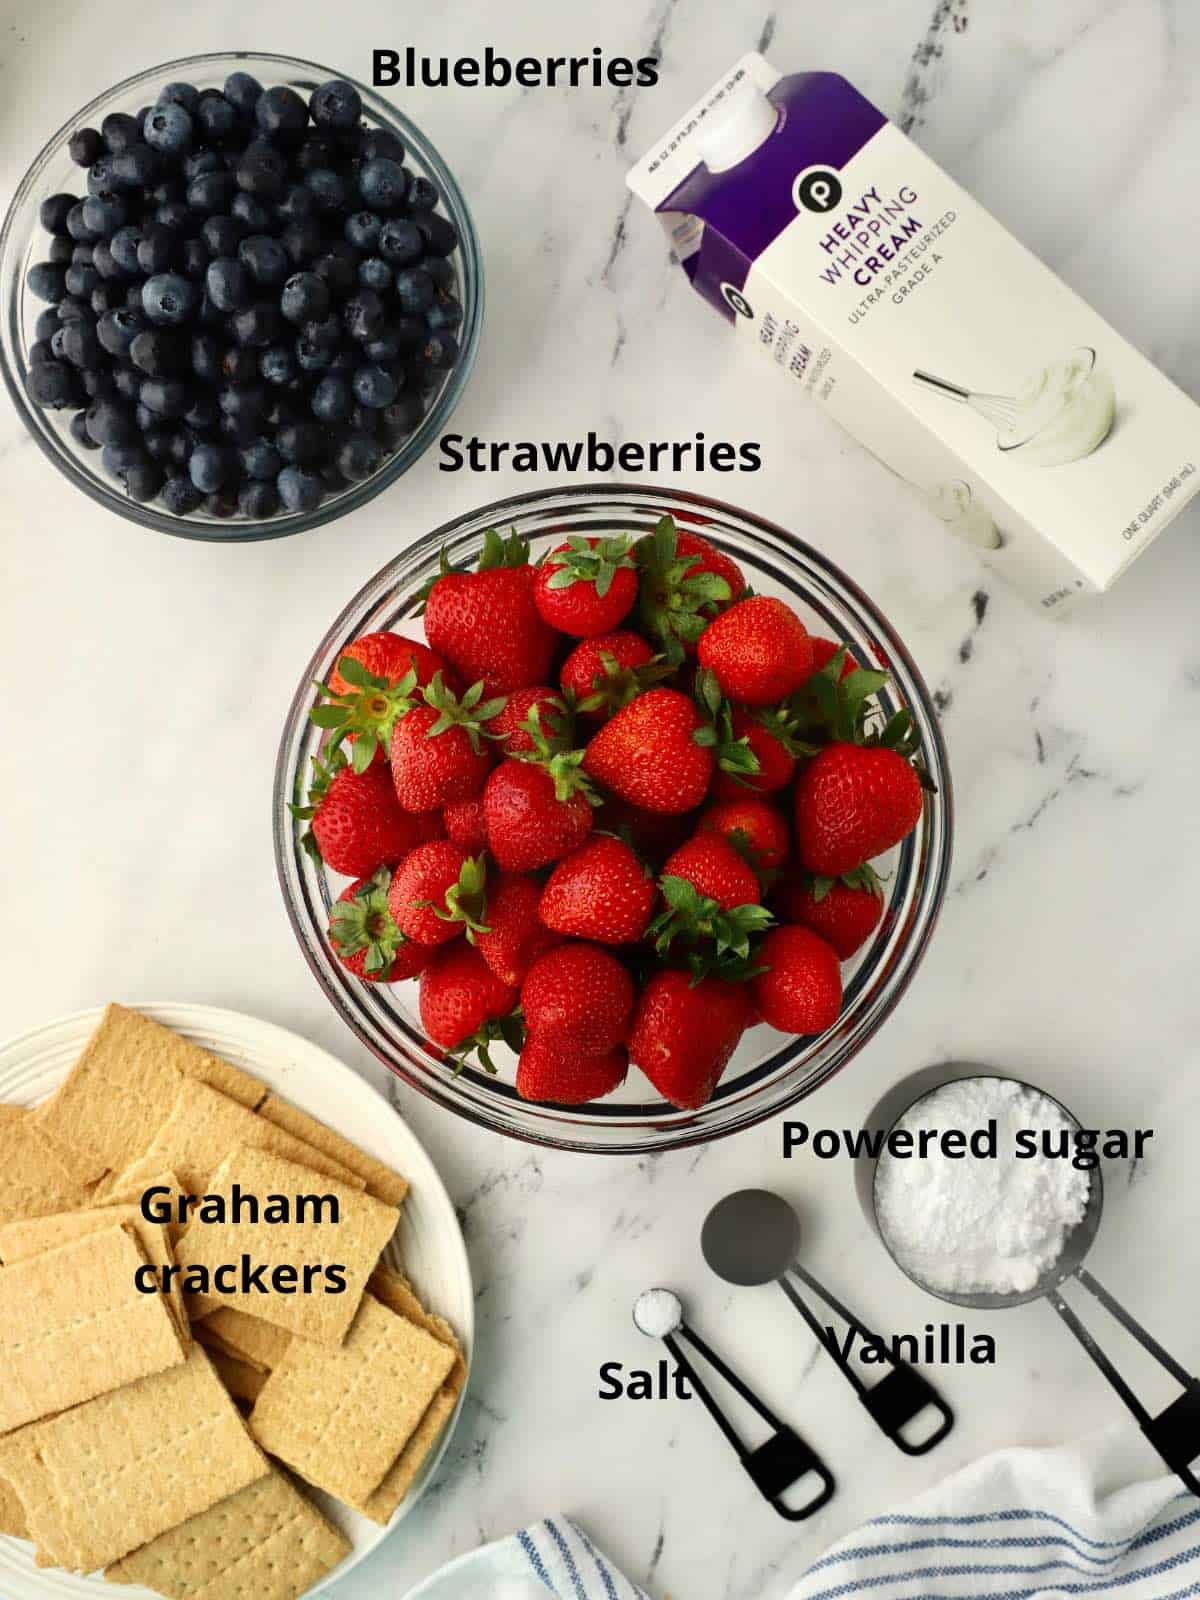 A bowl of fresh strawberries, along with blueberries and other ingredients for an icebox cake. 